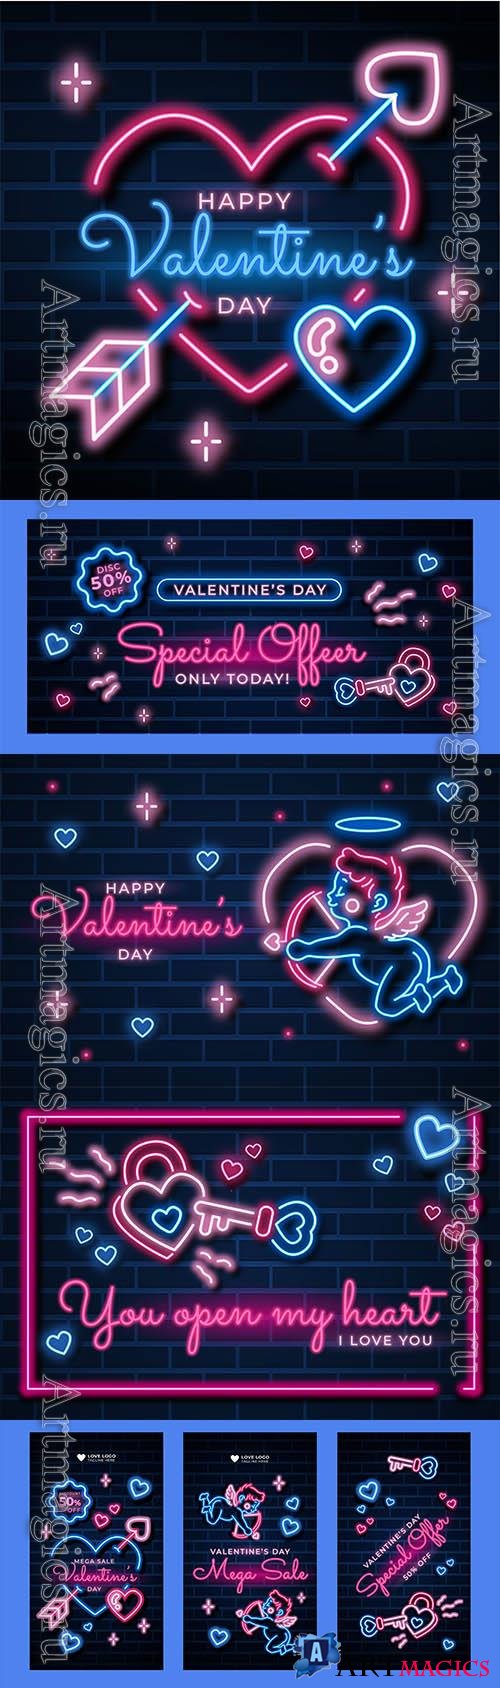 Vector realistic valentines day celebration background